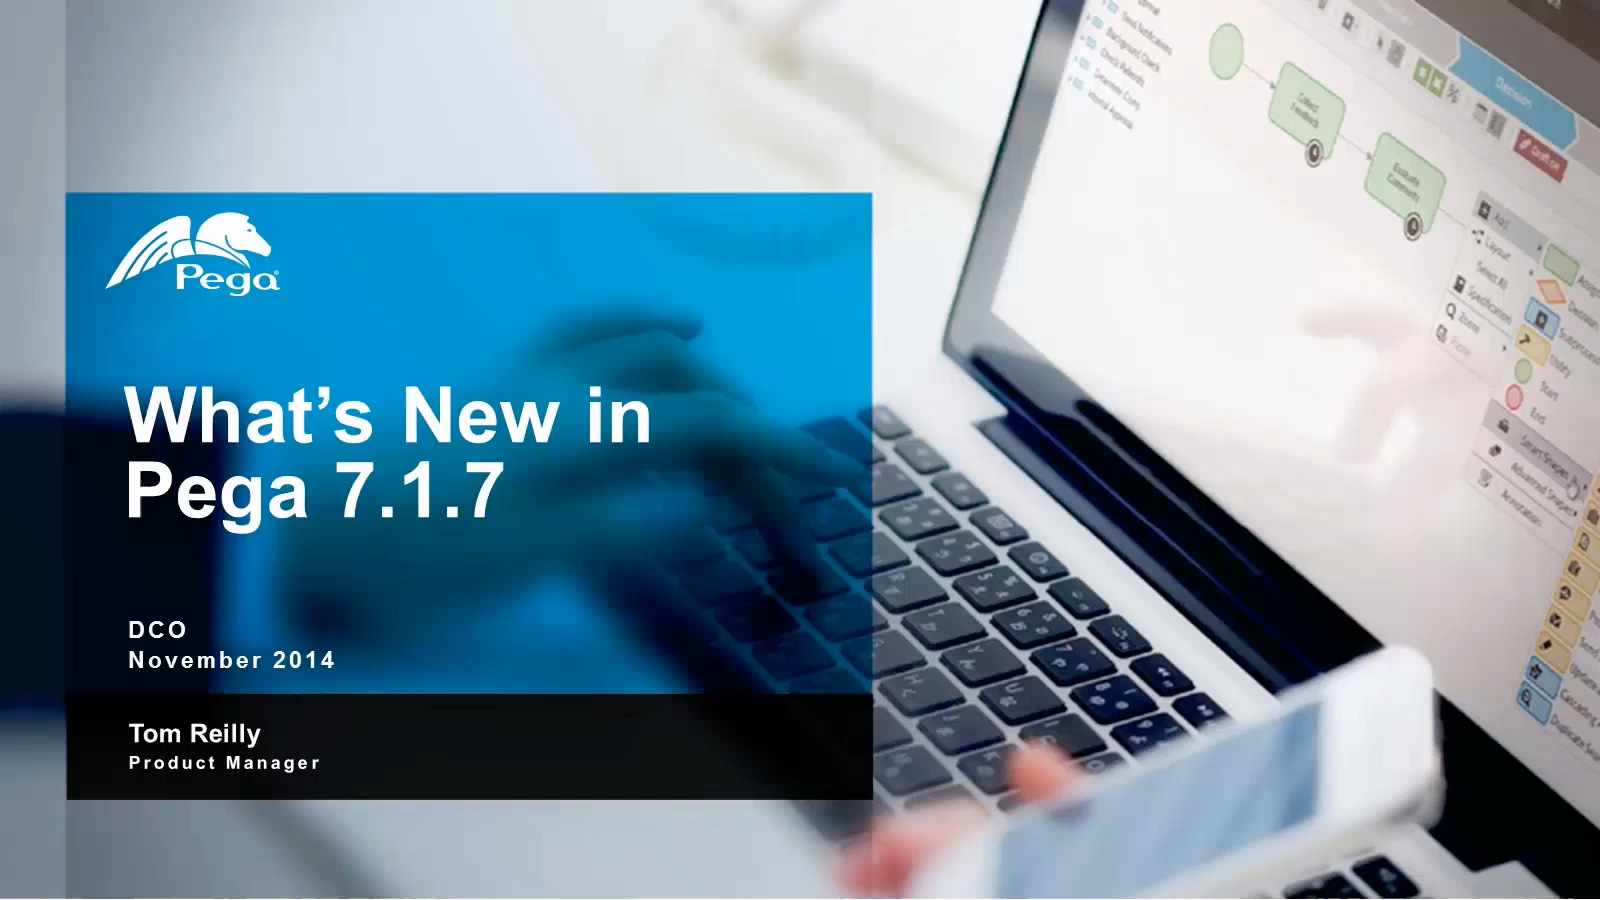 Pega 7.1.7 Update: What's new in DCO